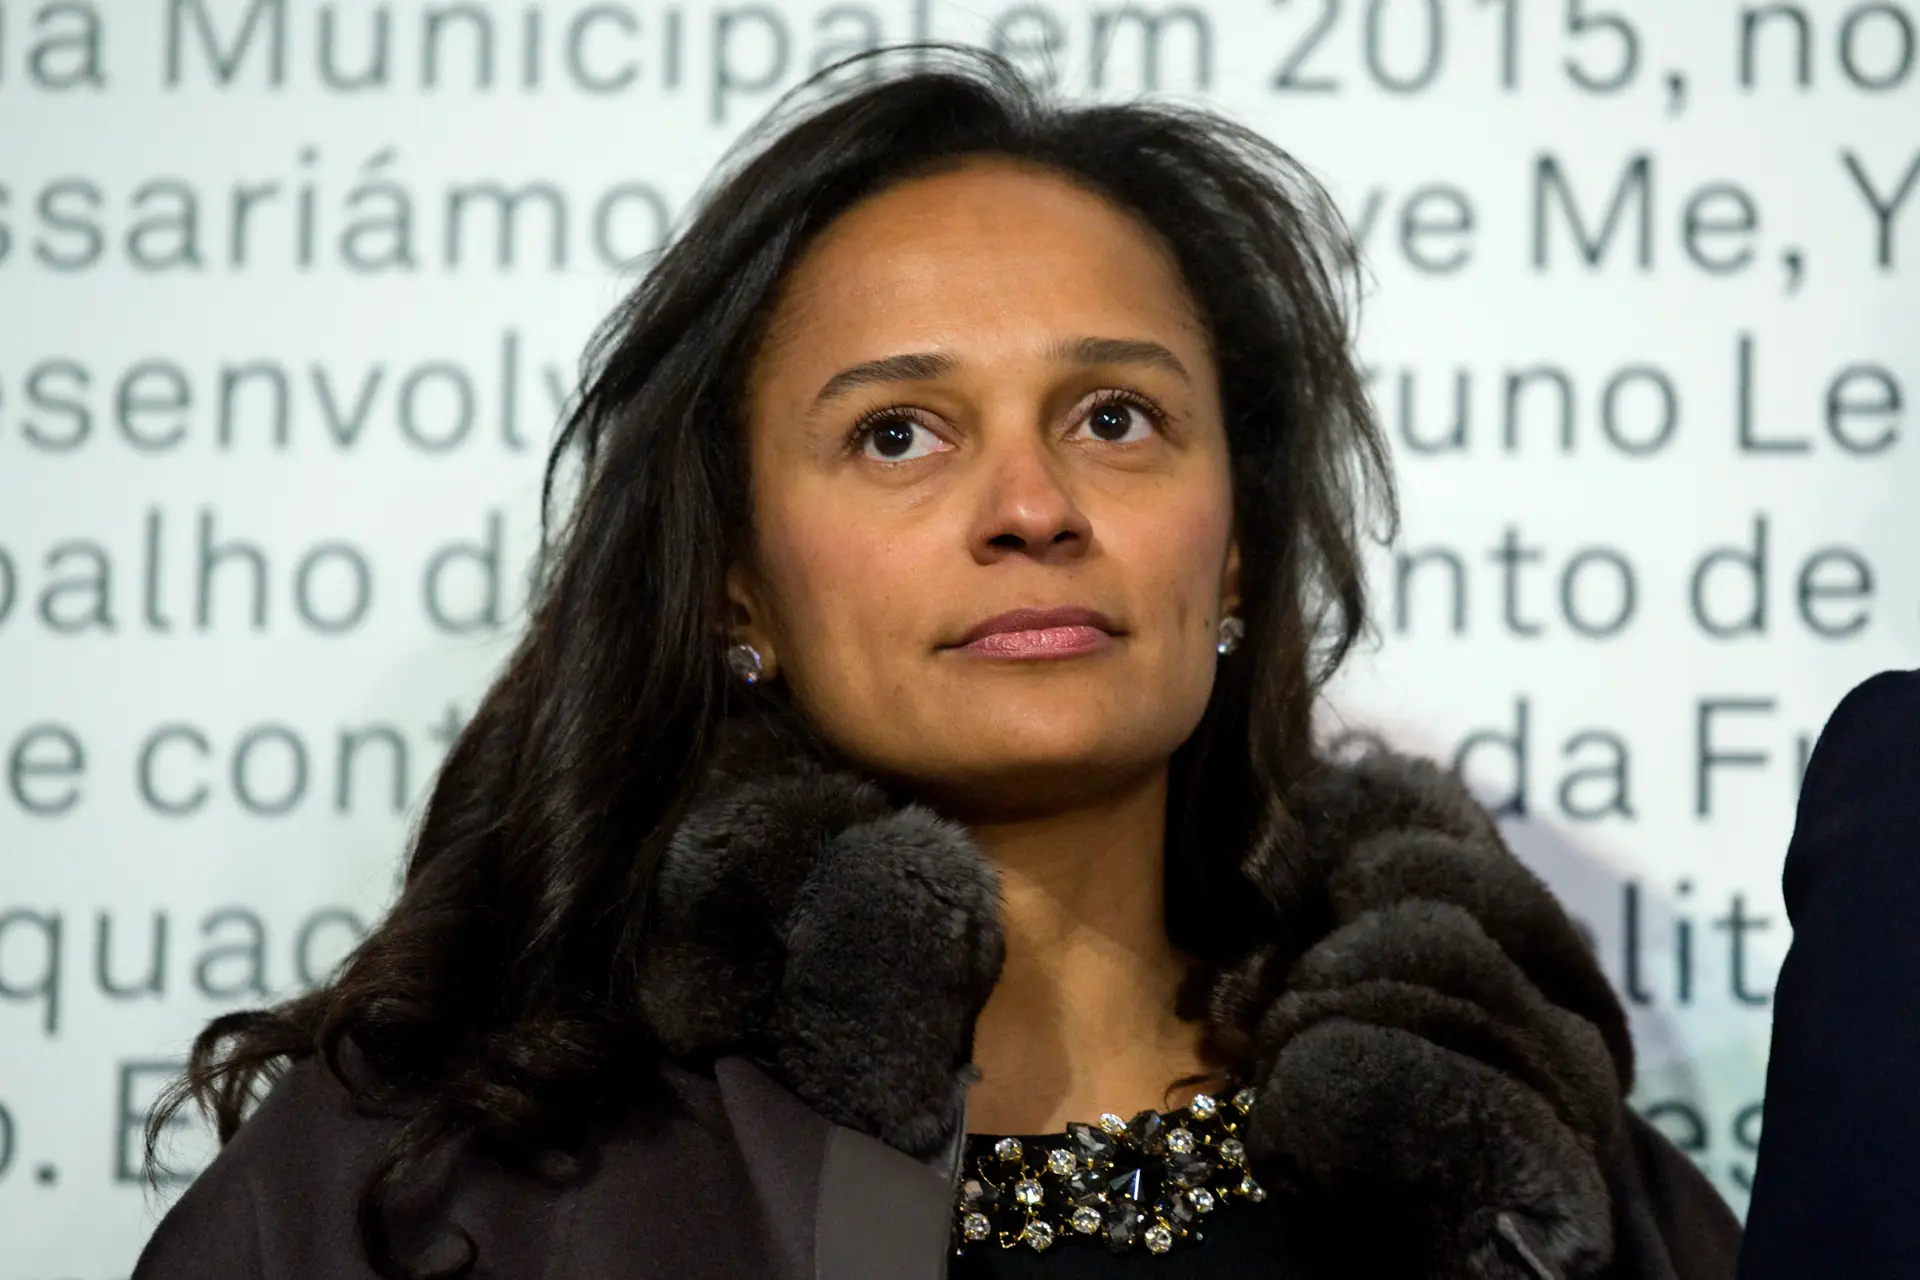 In this March 5, 2015 photo, Isabel dos Santos, reputedly Africa’s richest woman, attends the opening of an art exhibition featuring works from the collection of her husband and art collector Sindika Dokolo in Porto, Portugal. On Monday, Jan. 6, 2020, Angola’s foreign minister Manuel Augusto said that there is no political motivation behind the government’s demand for more than $1 billion from dos Santos, her husband and a Portuguese business partner. Isabel dos Santos is a daughter of Jose Eduardo dos Santos, who ruled the oil- and diamond-rich nation for 38 years until 2017. (AP Photo/Paulo Duarte)